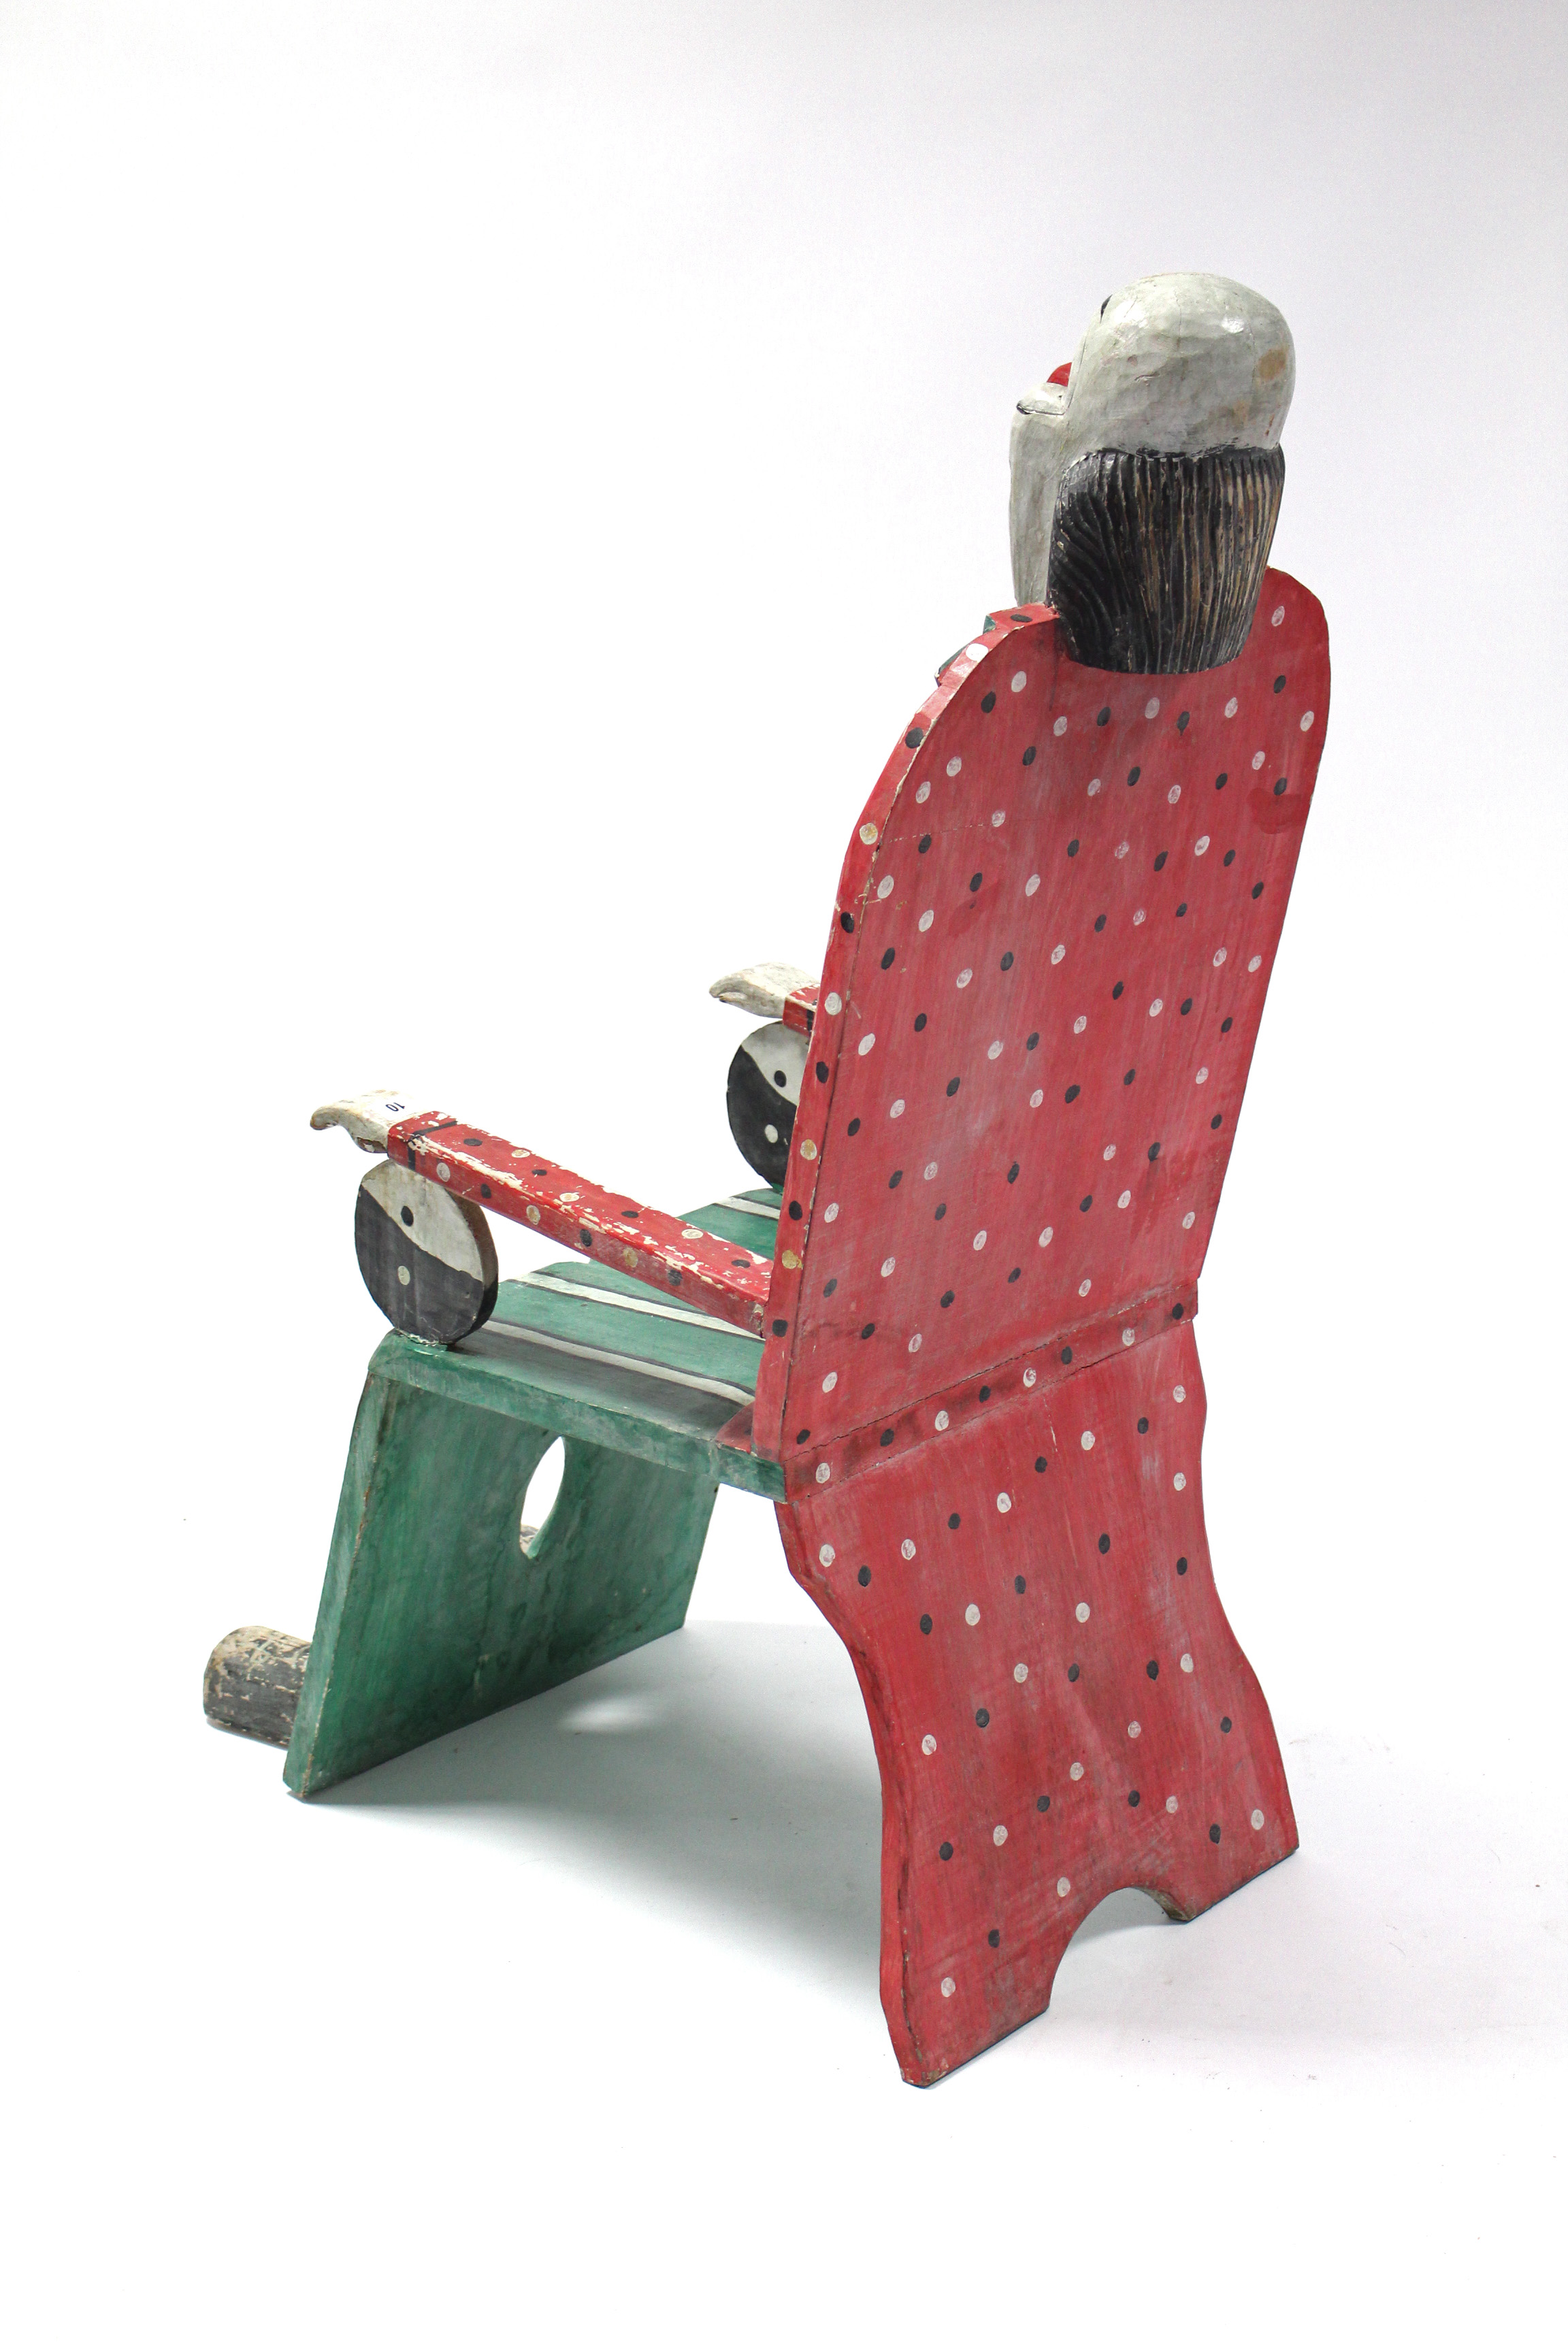 AN EARLY/MID 20th CENTURY PAINTED WOODEN NOVELTY CIRCUS/FAIRGROUND “CLOWN” CHAIR, 42½” HIGH. - Image 7 of 7